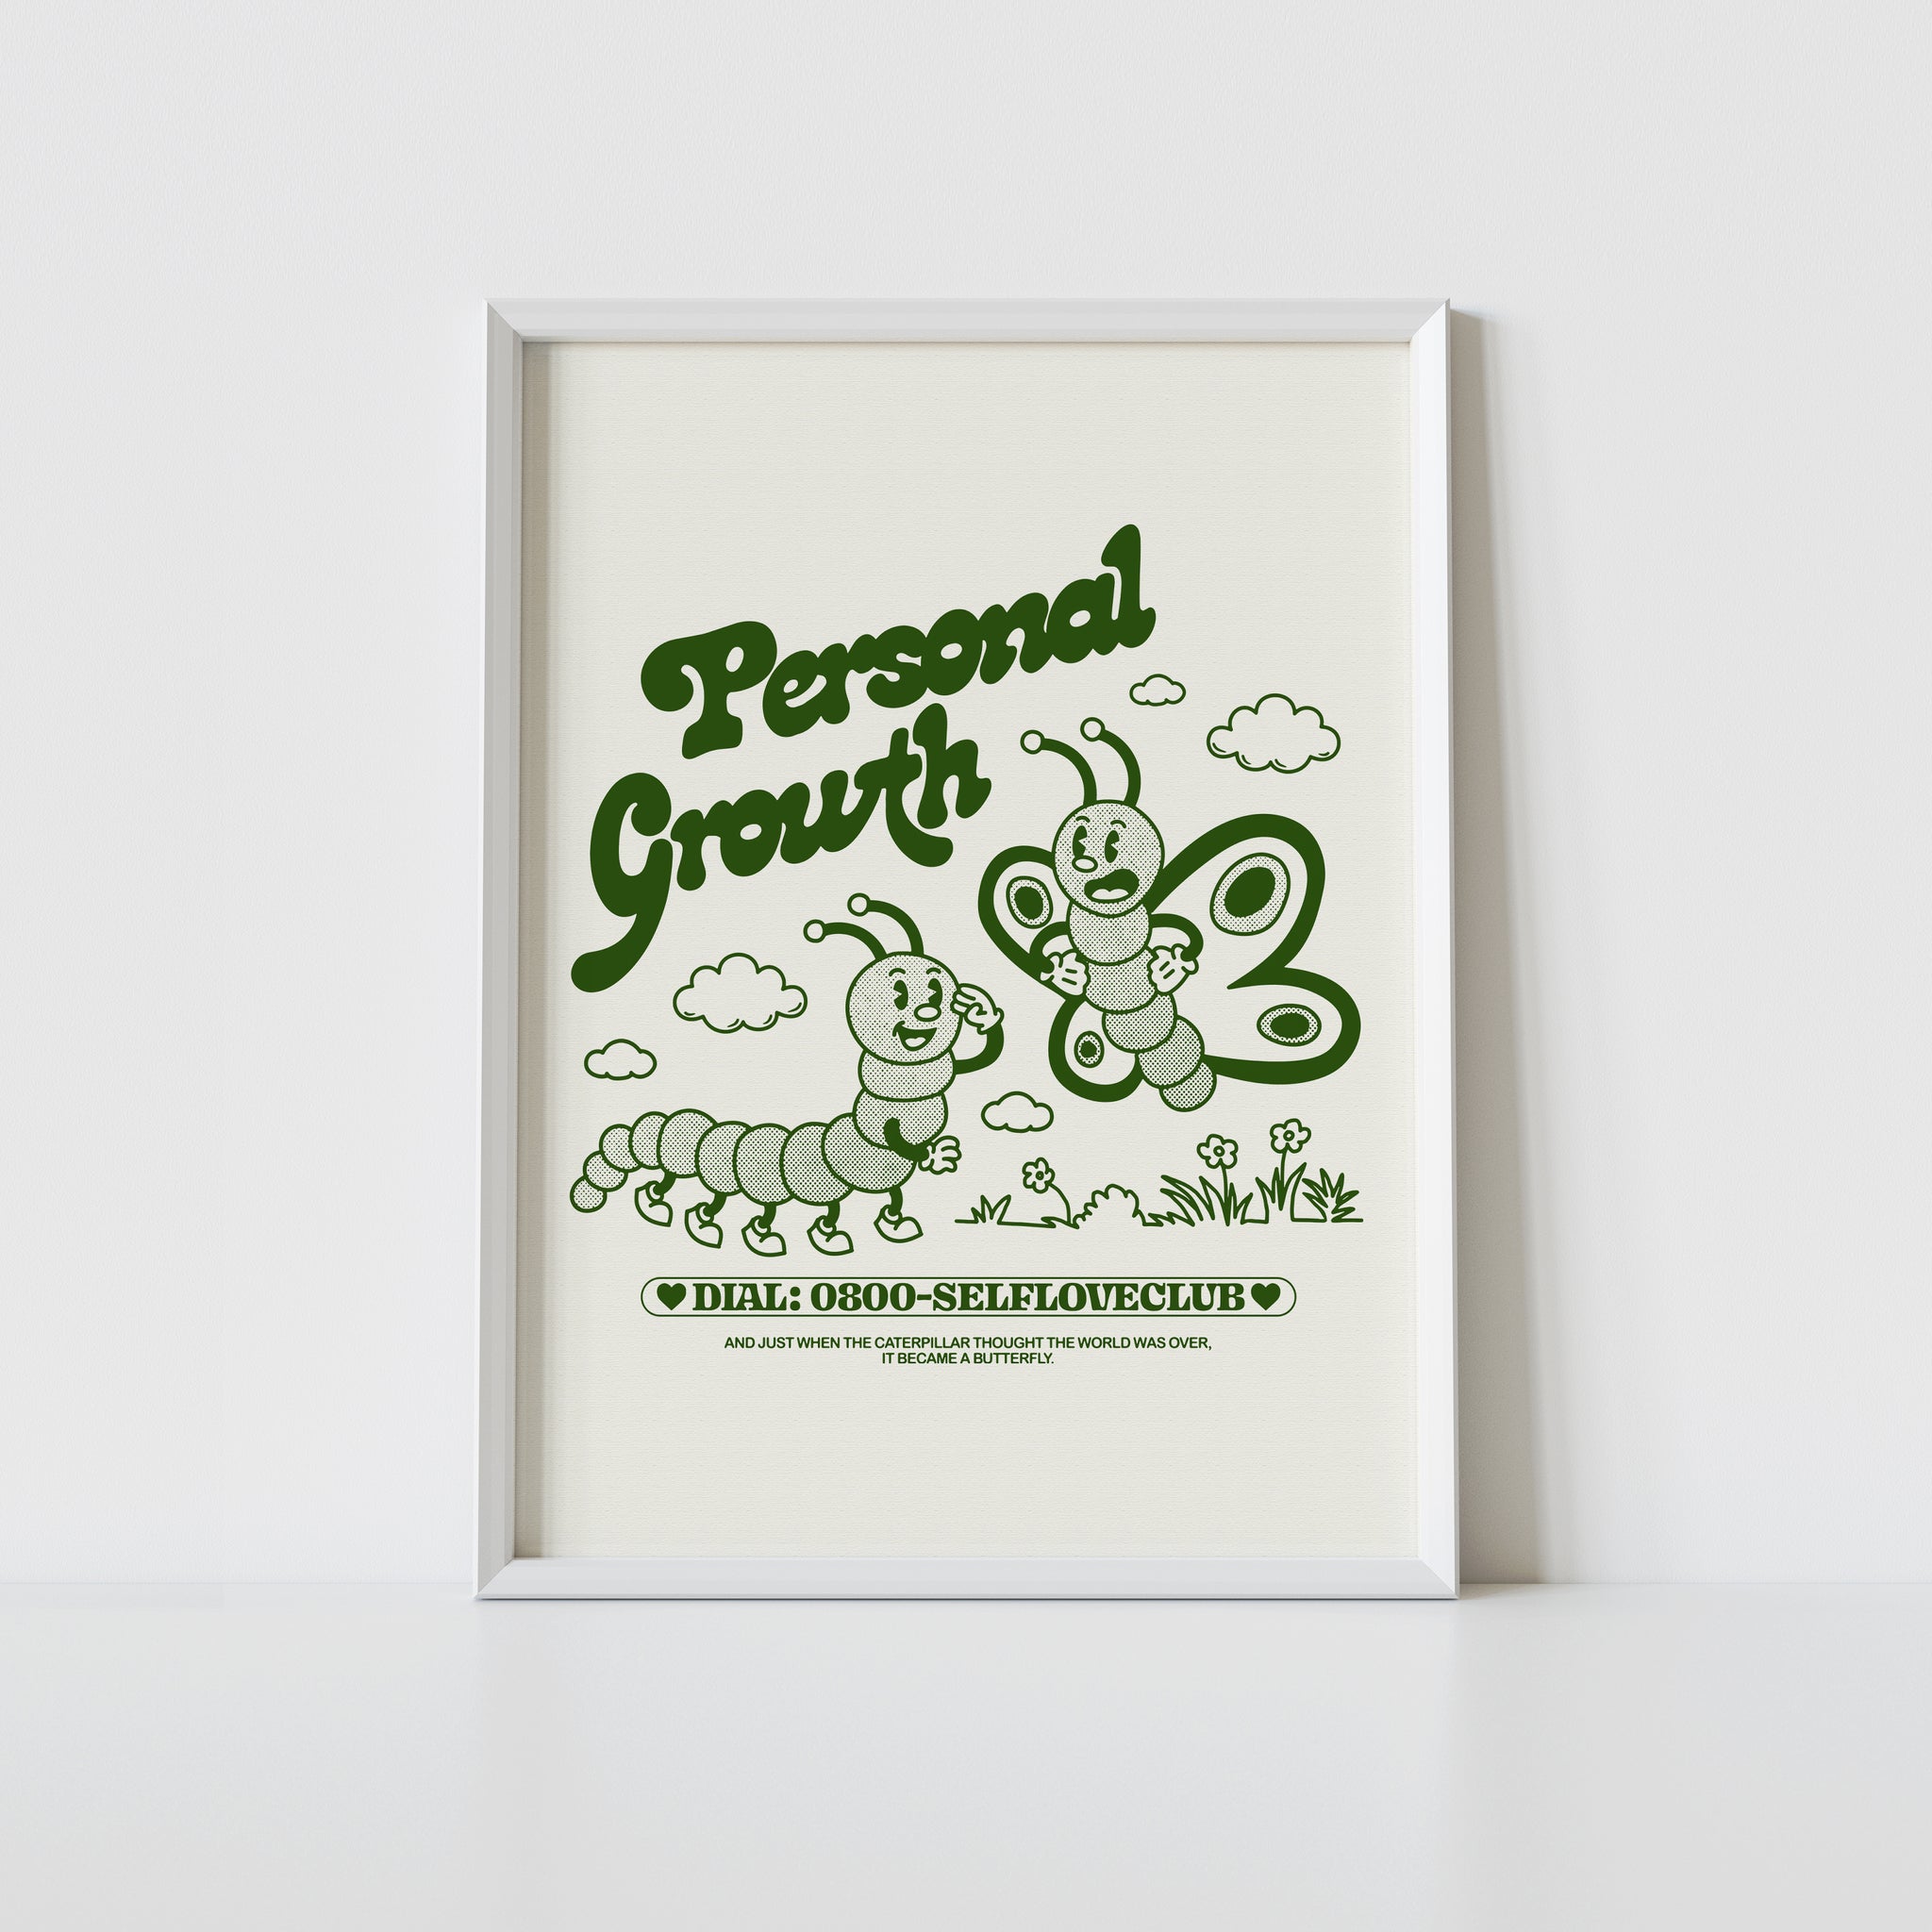 'Personal Growth' print